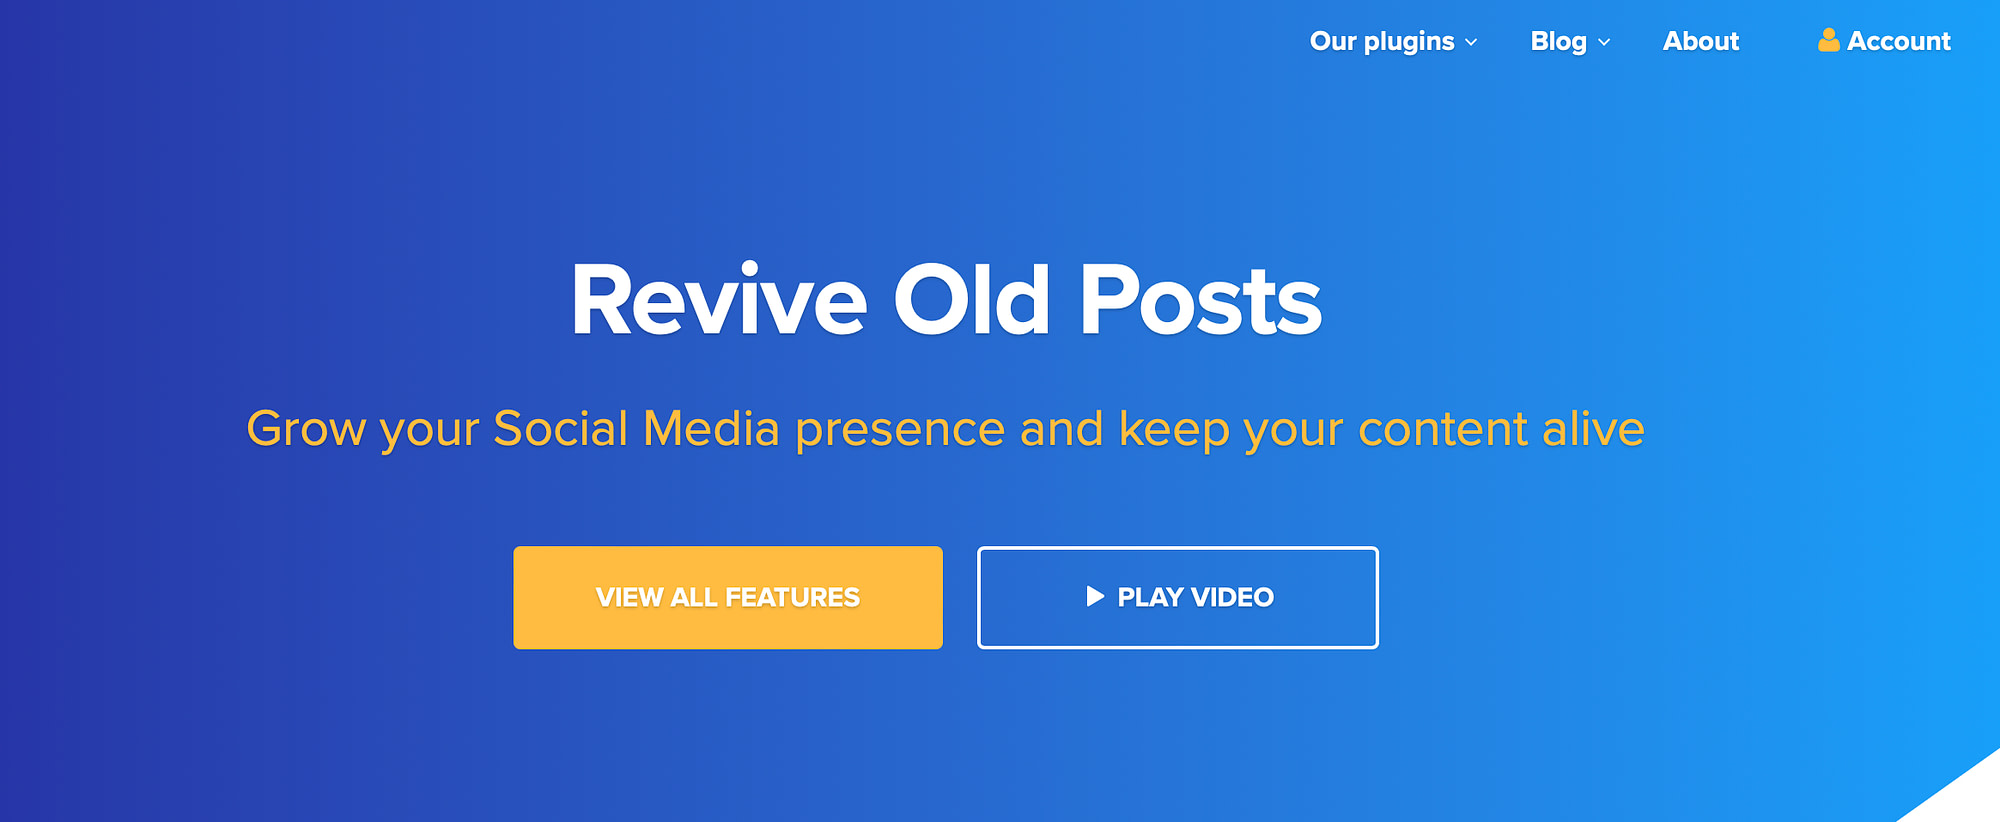 revive-old-posts